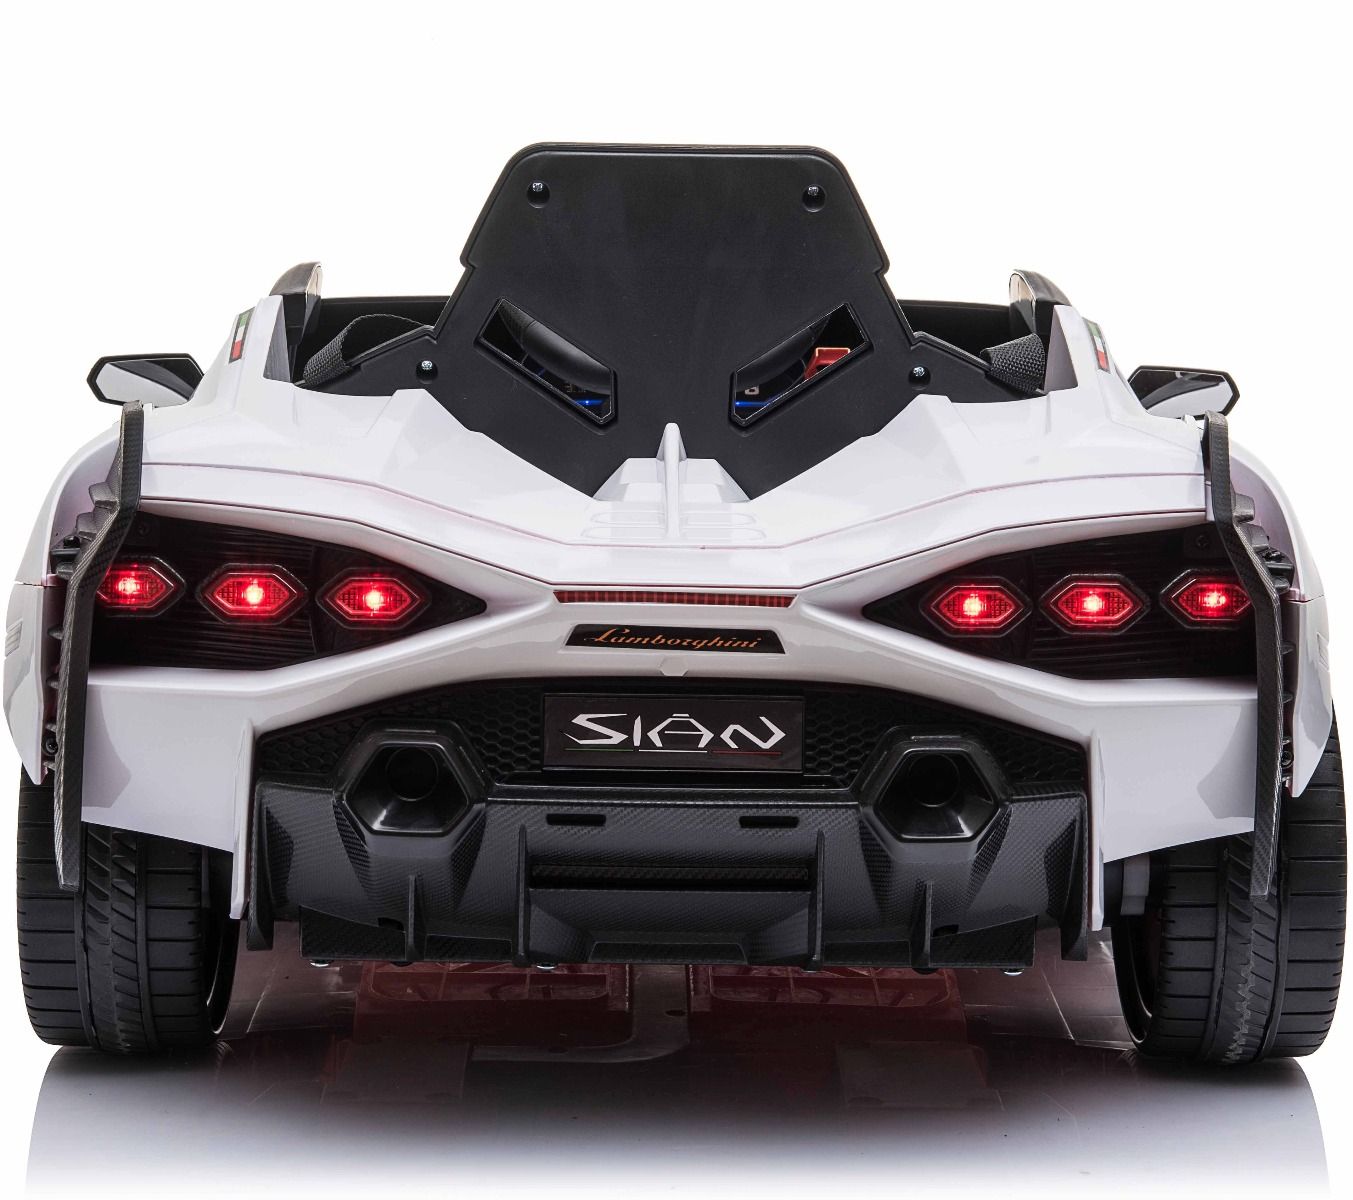 "White Lamborghini Sian electric ride-on car with MP4 screen and parental control for kids"